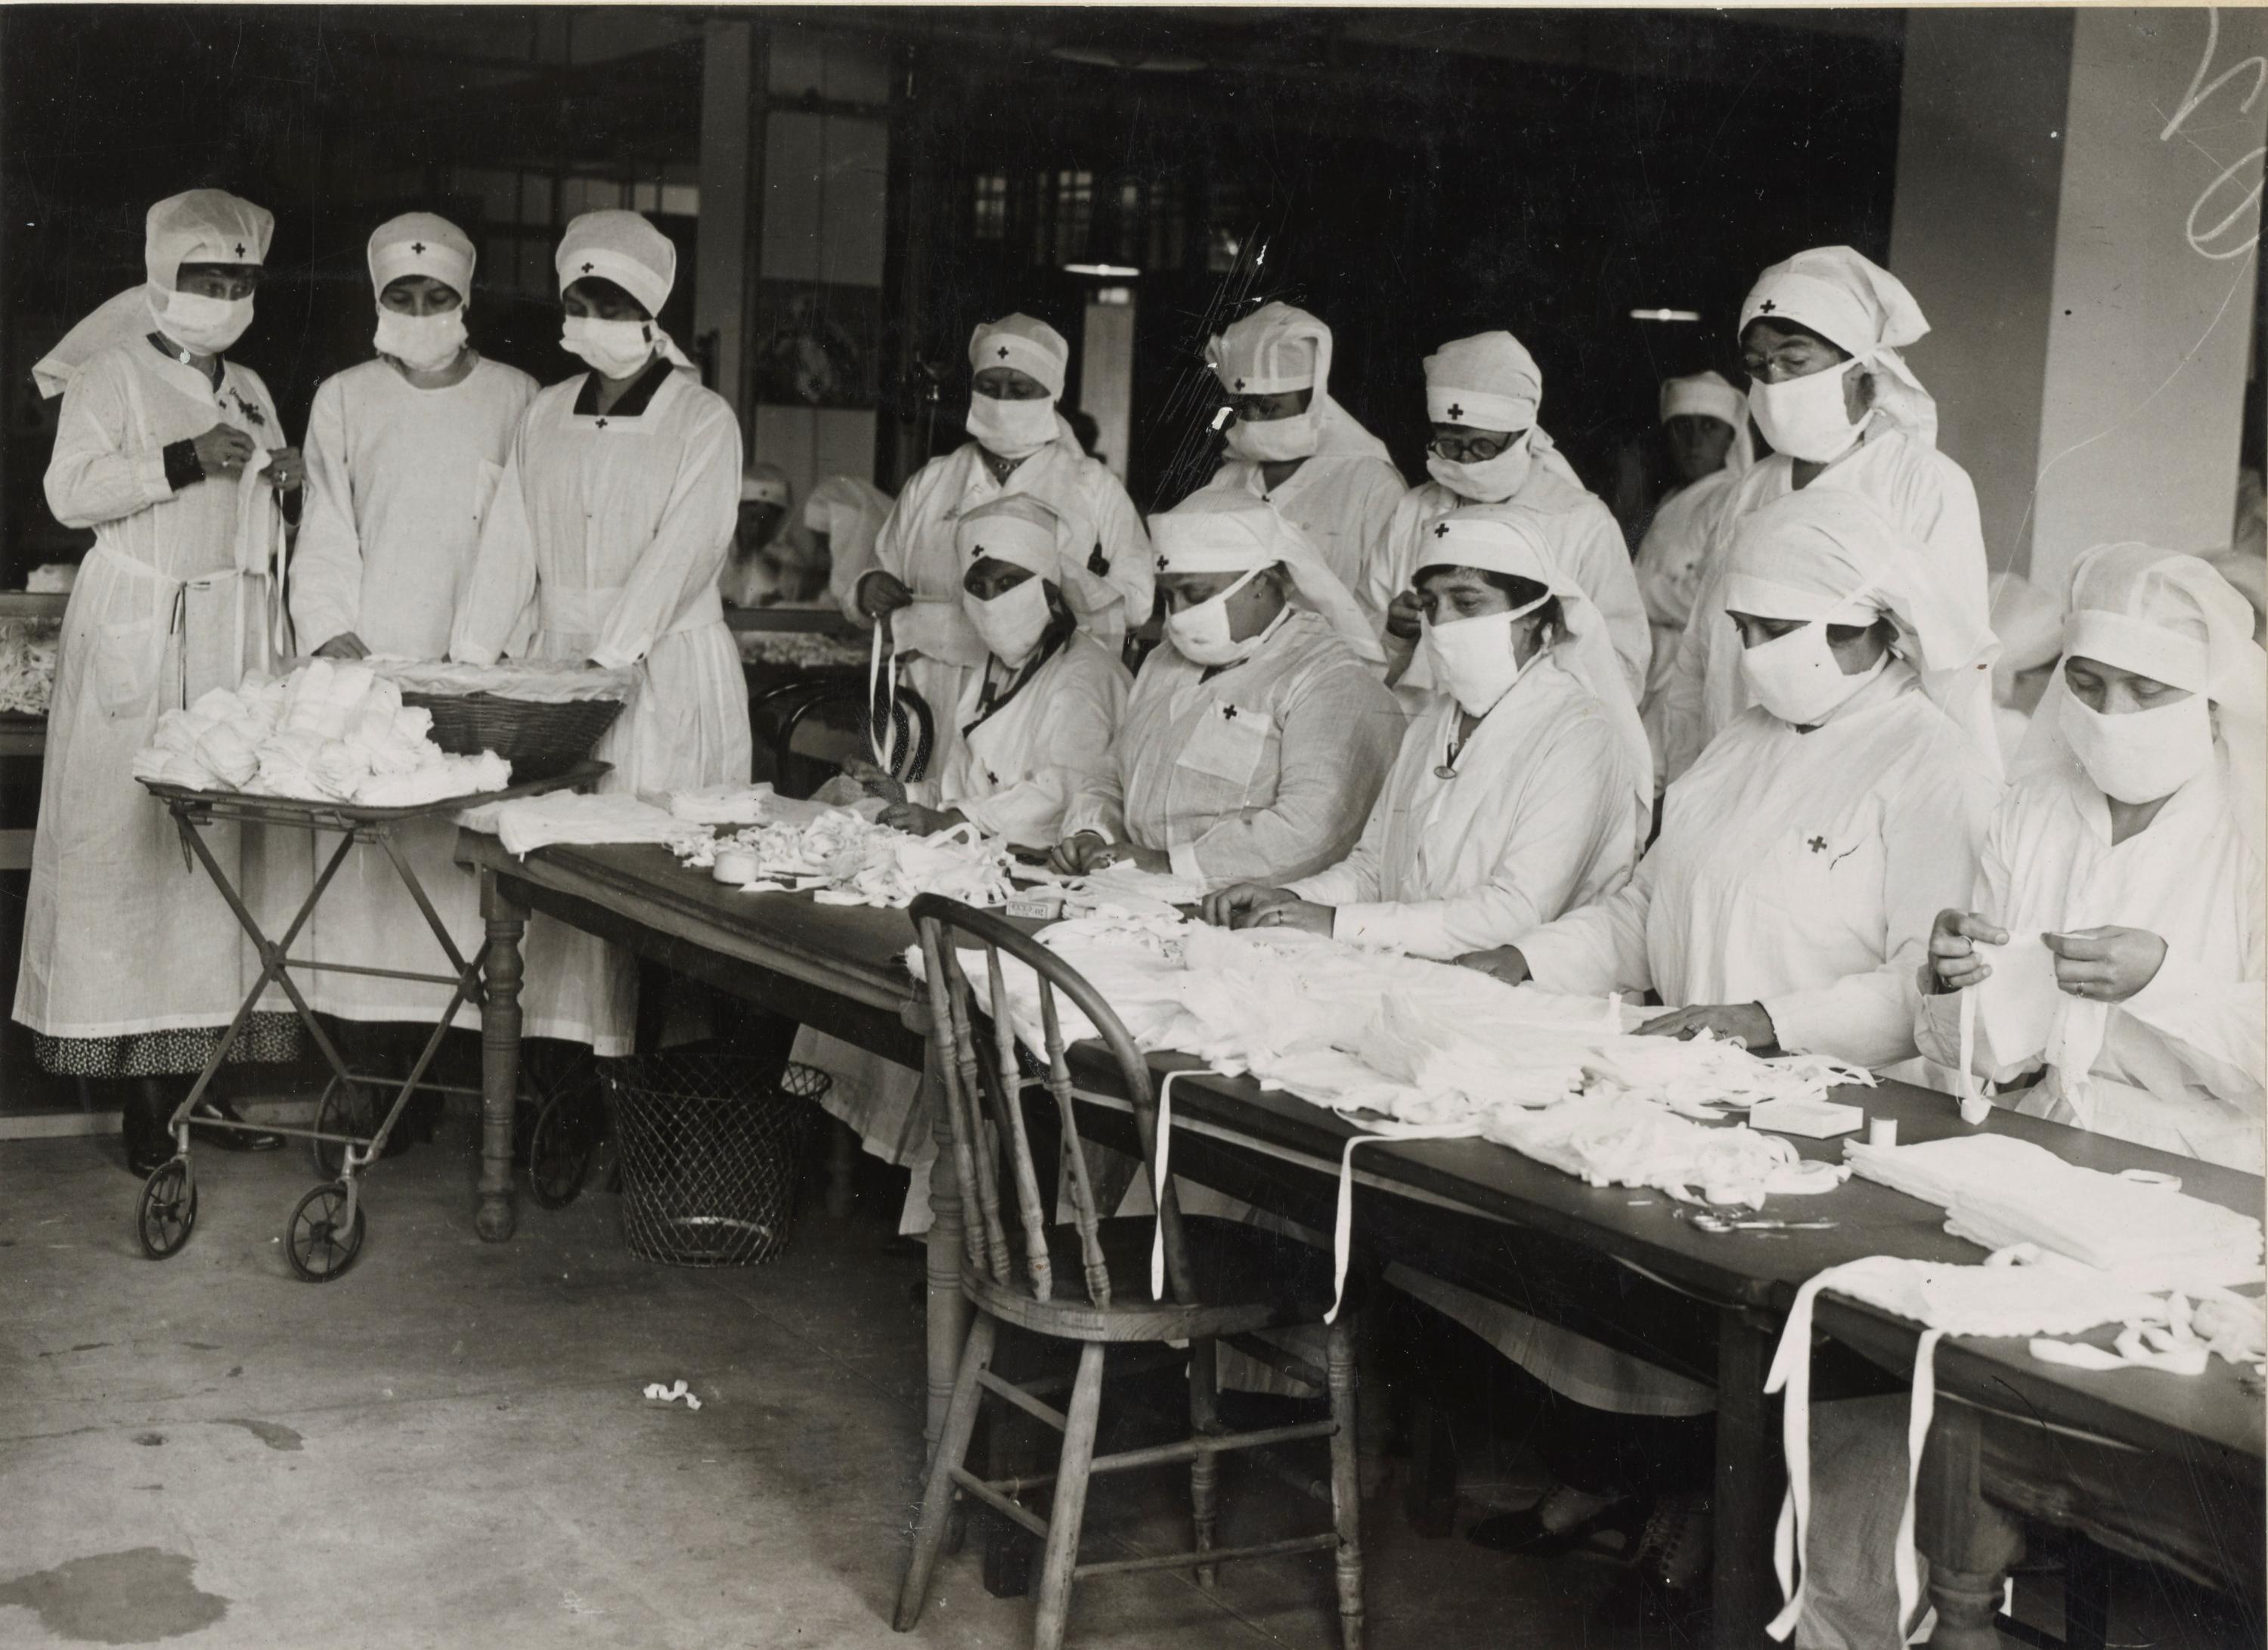 Red Cross workers in Boston, Massachusetts, hand out face masks during the Spanish flu pandemic. Credit: National Archives